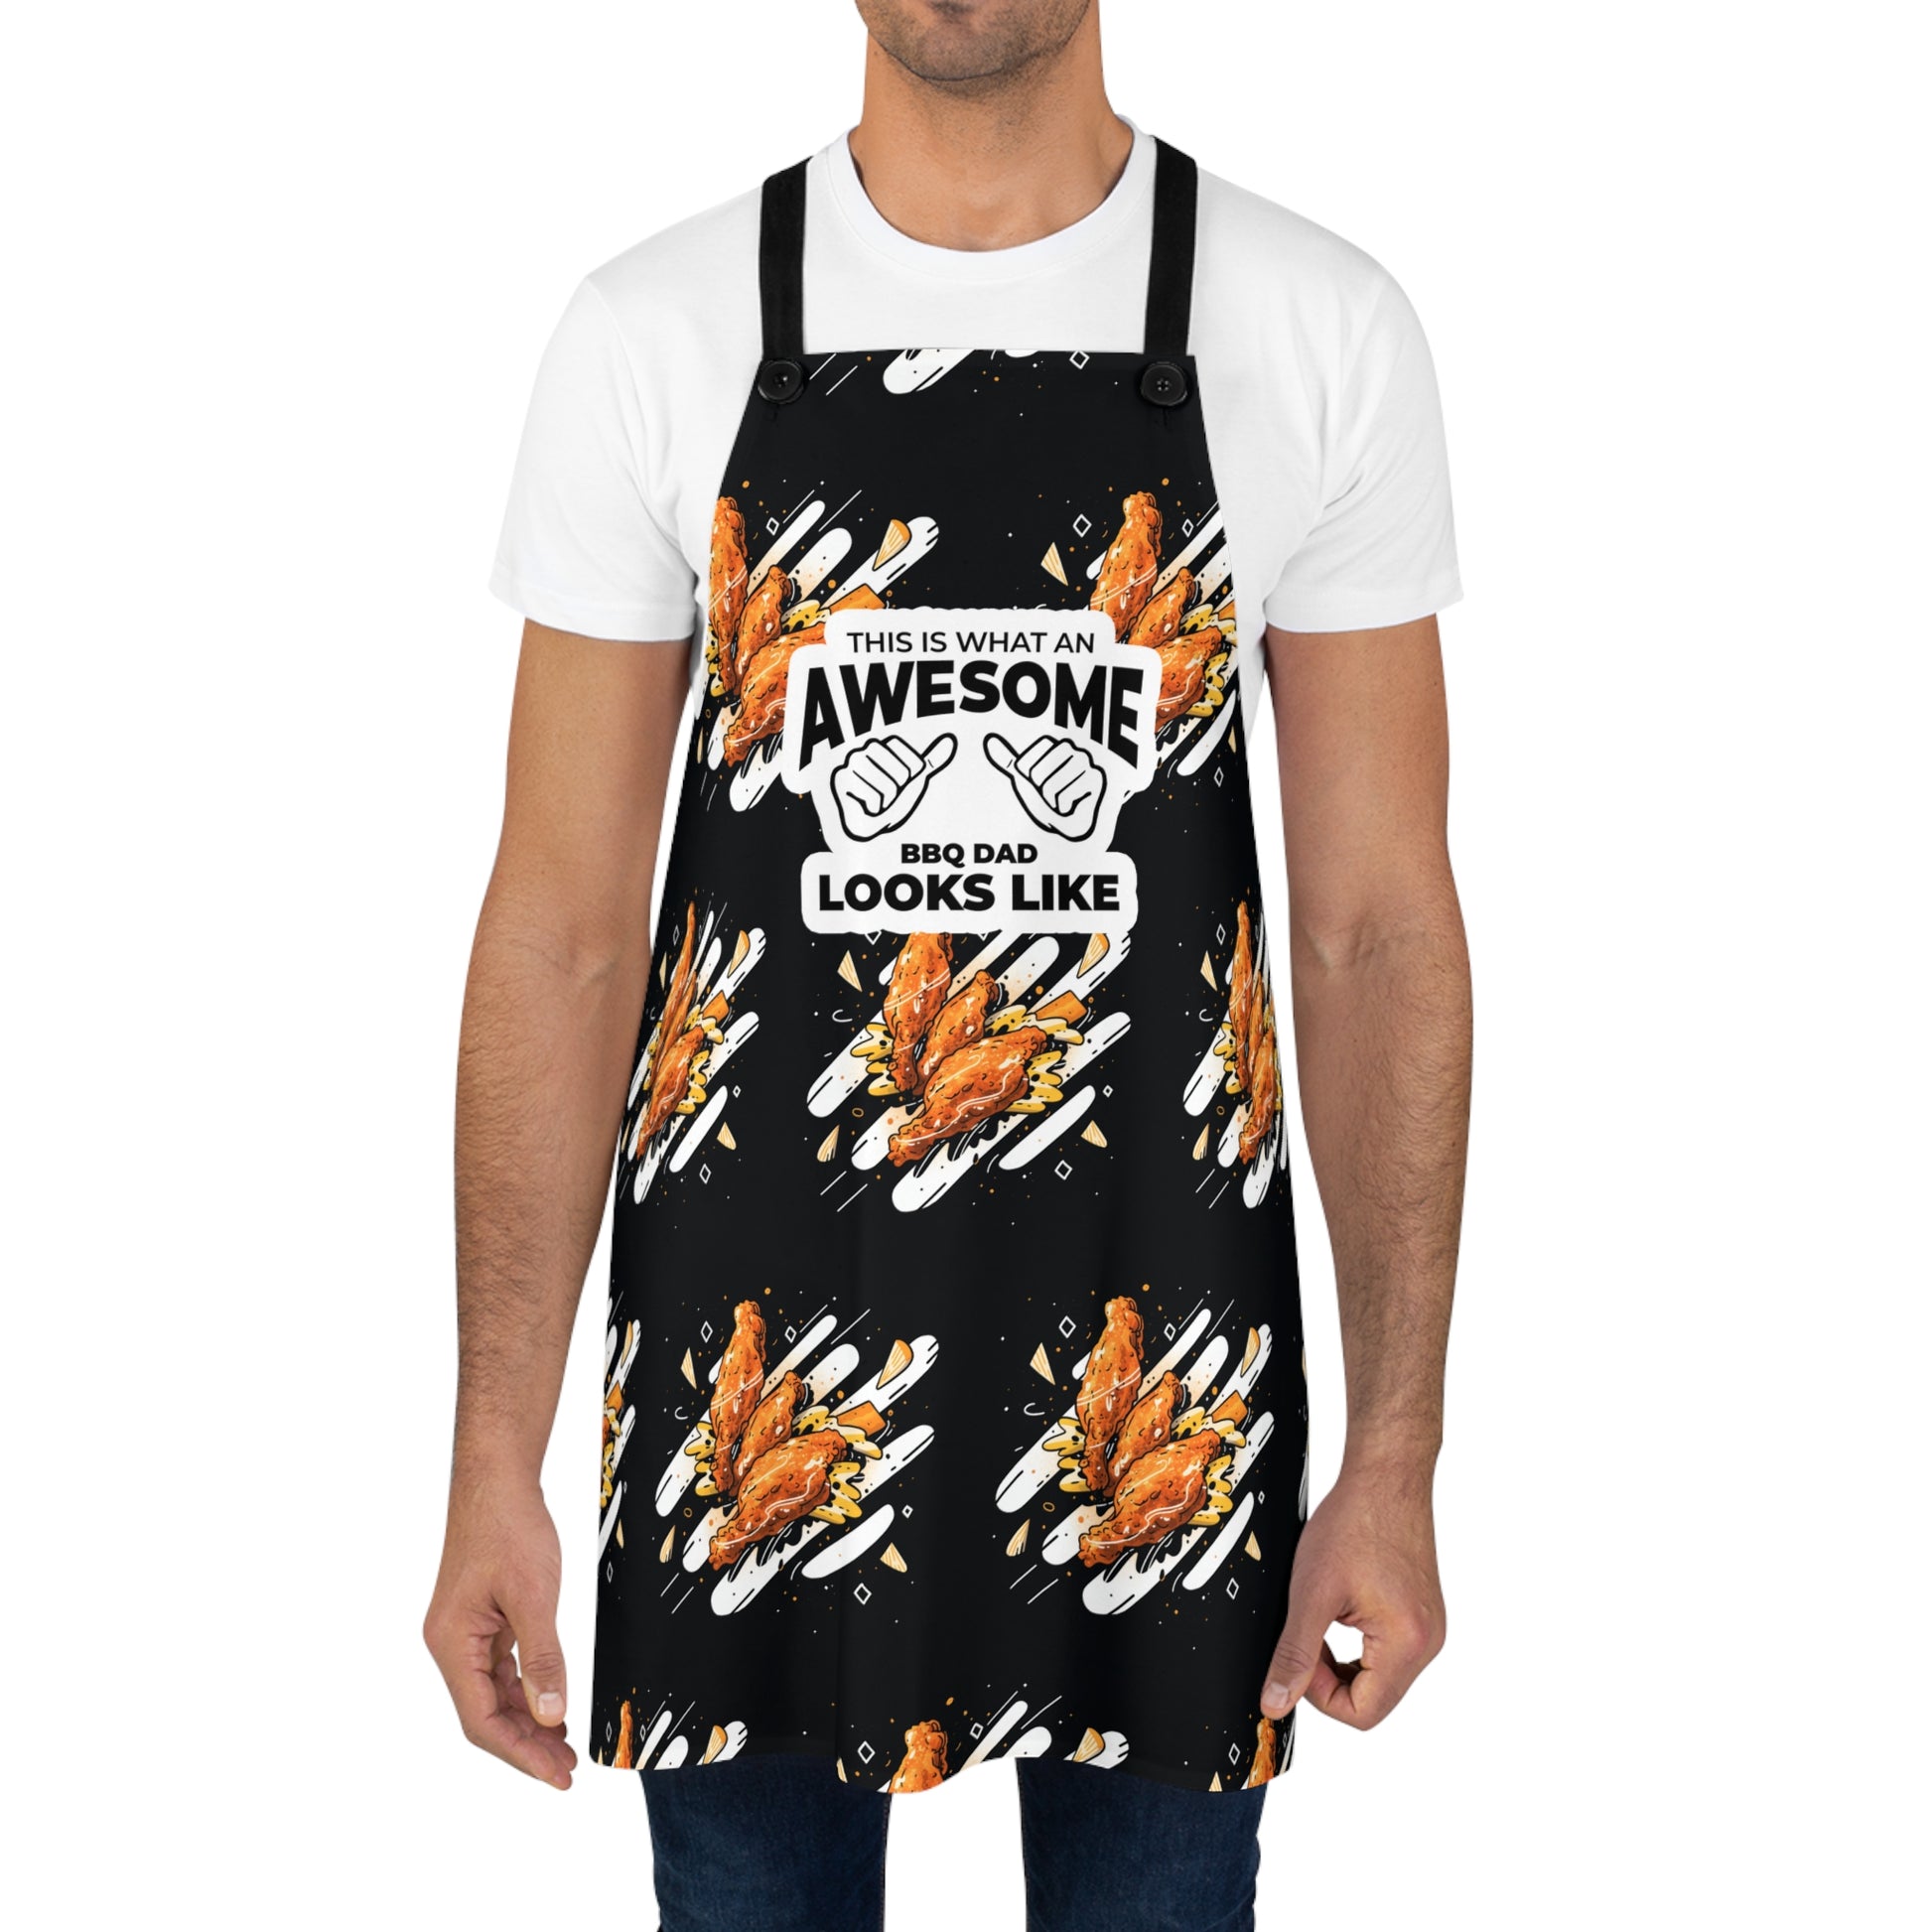 Black Apron for the Awesome BBQ Dad